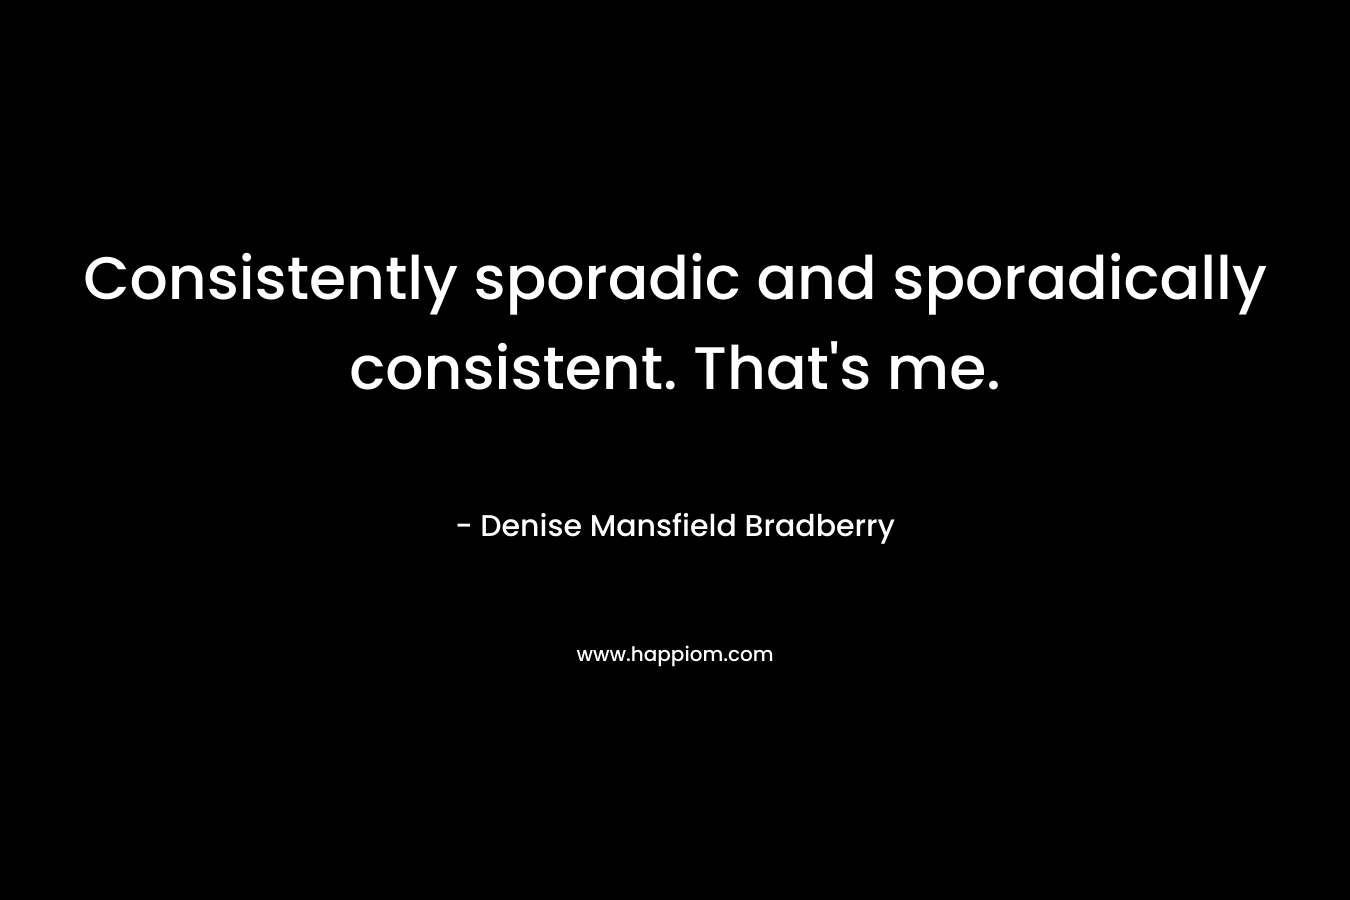 Consistently sporadic and sporadically consistent. That's me.